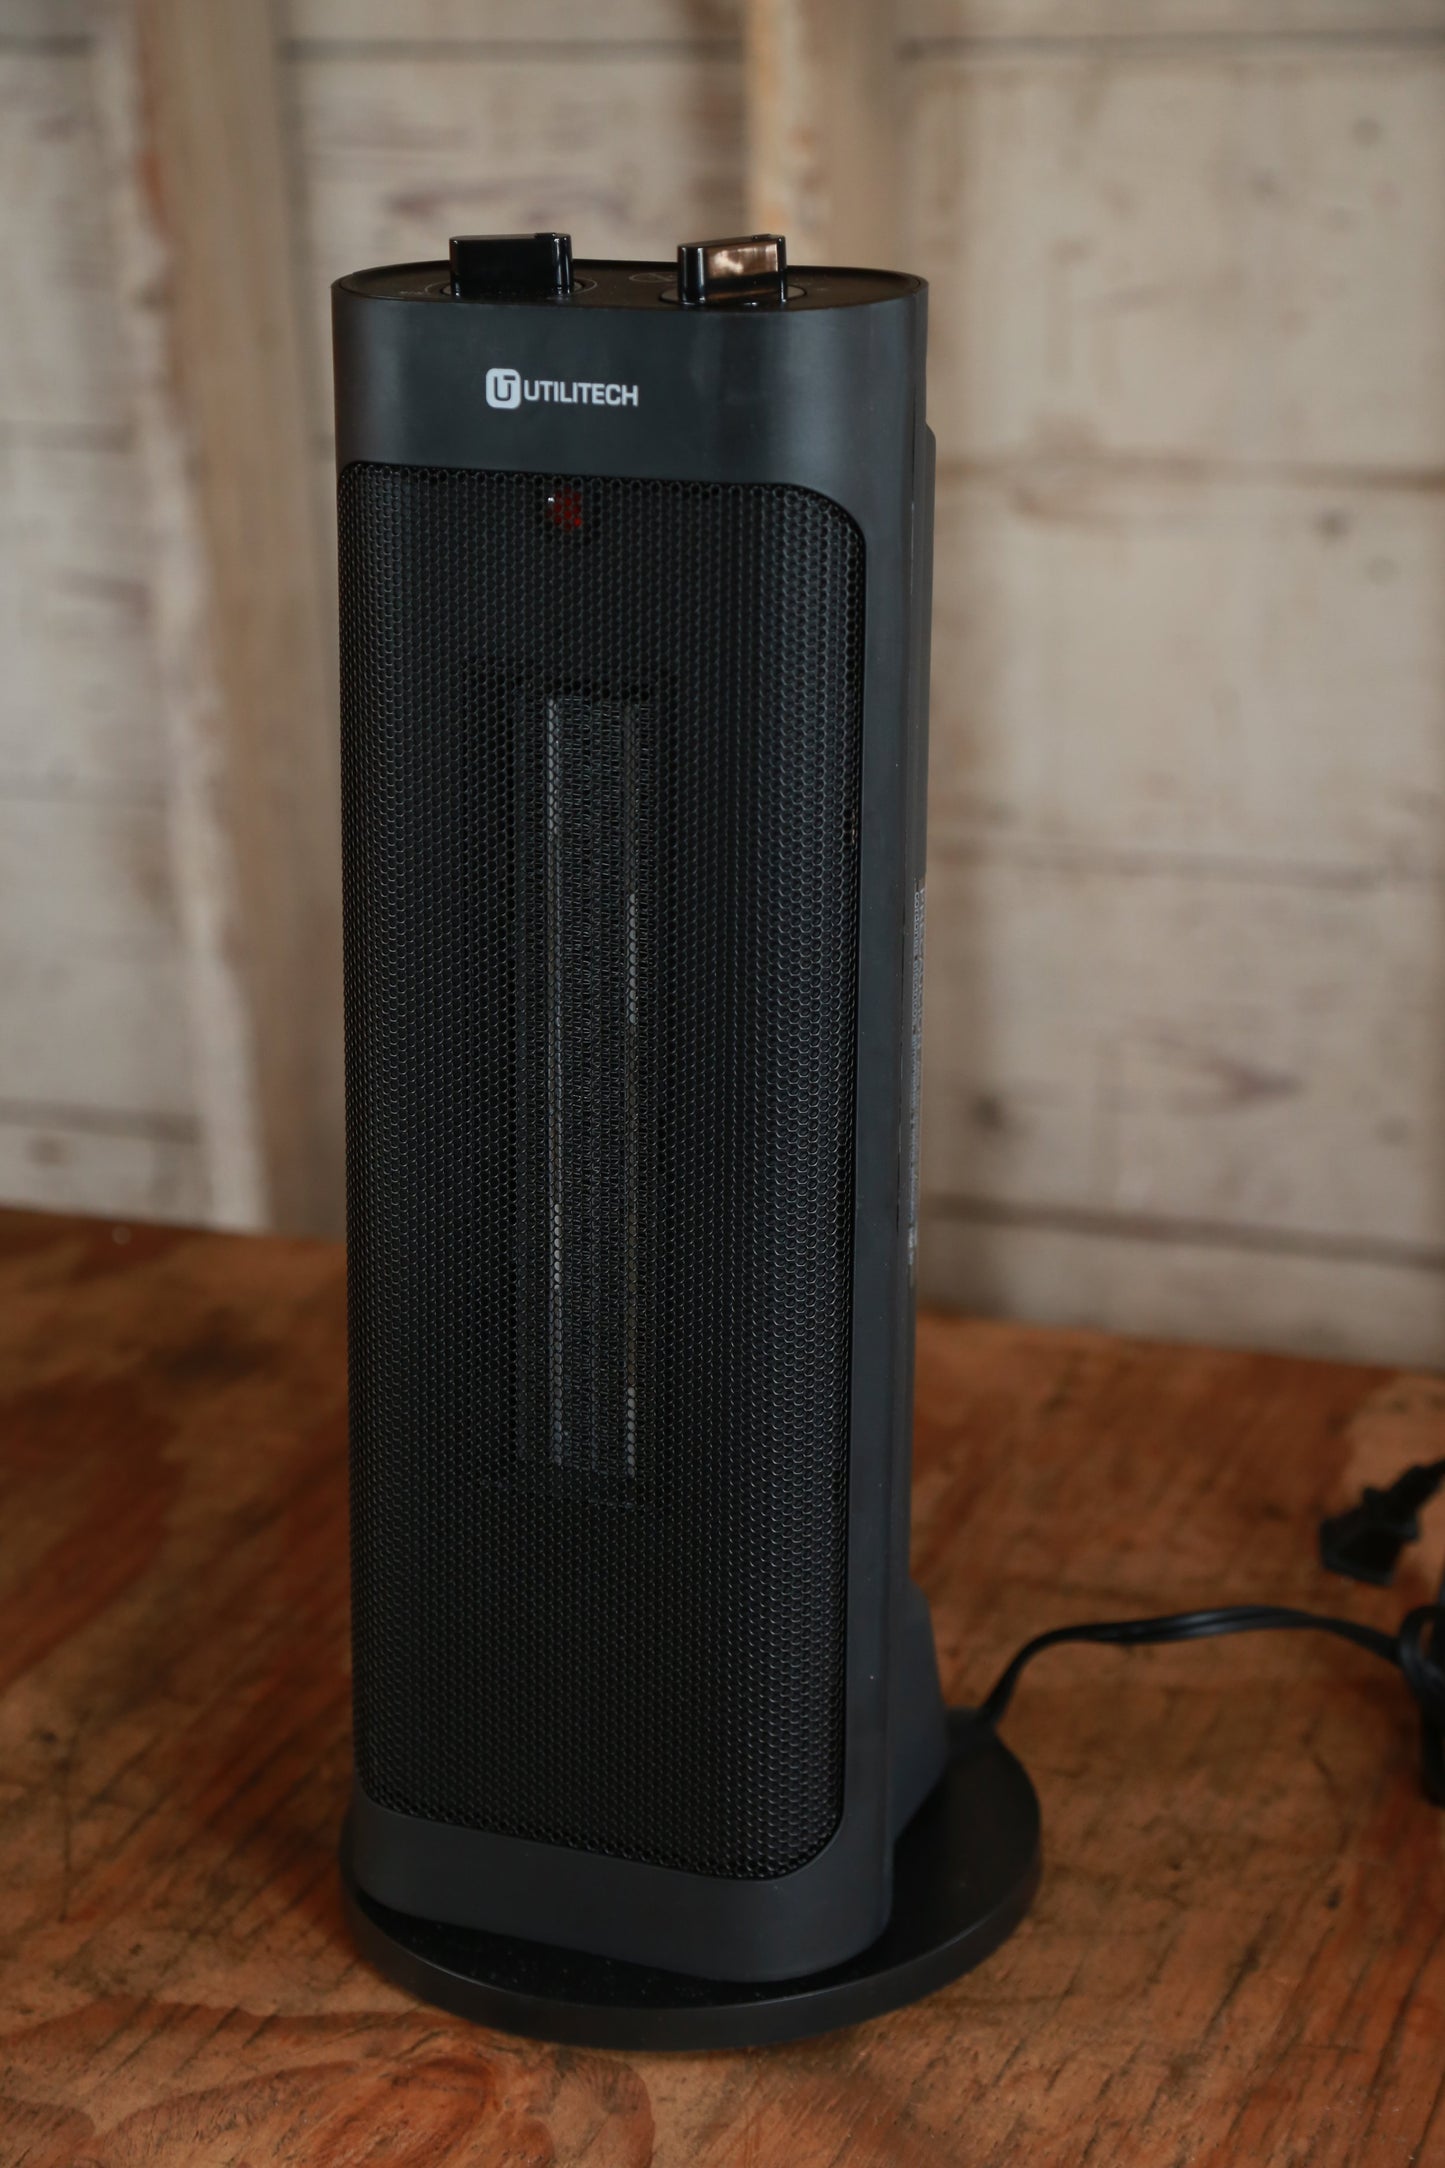 Utilitech 1500-Watt Ceramic Tower Indoor Electric Space Heater with Thermostat